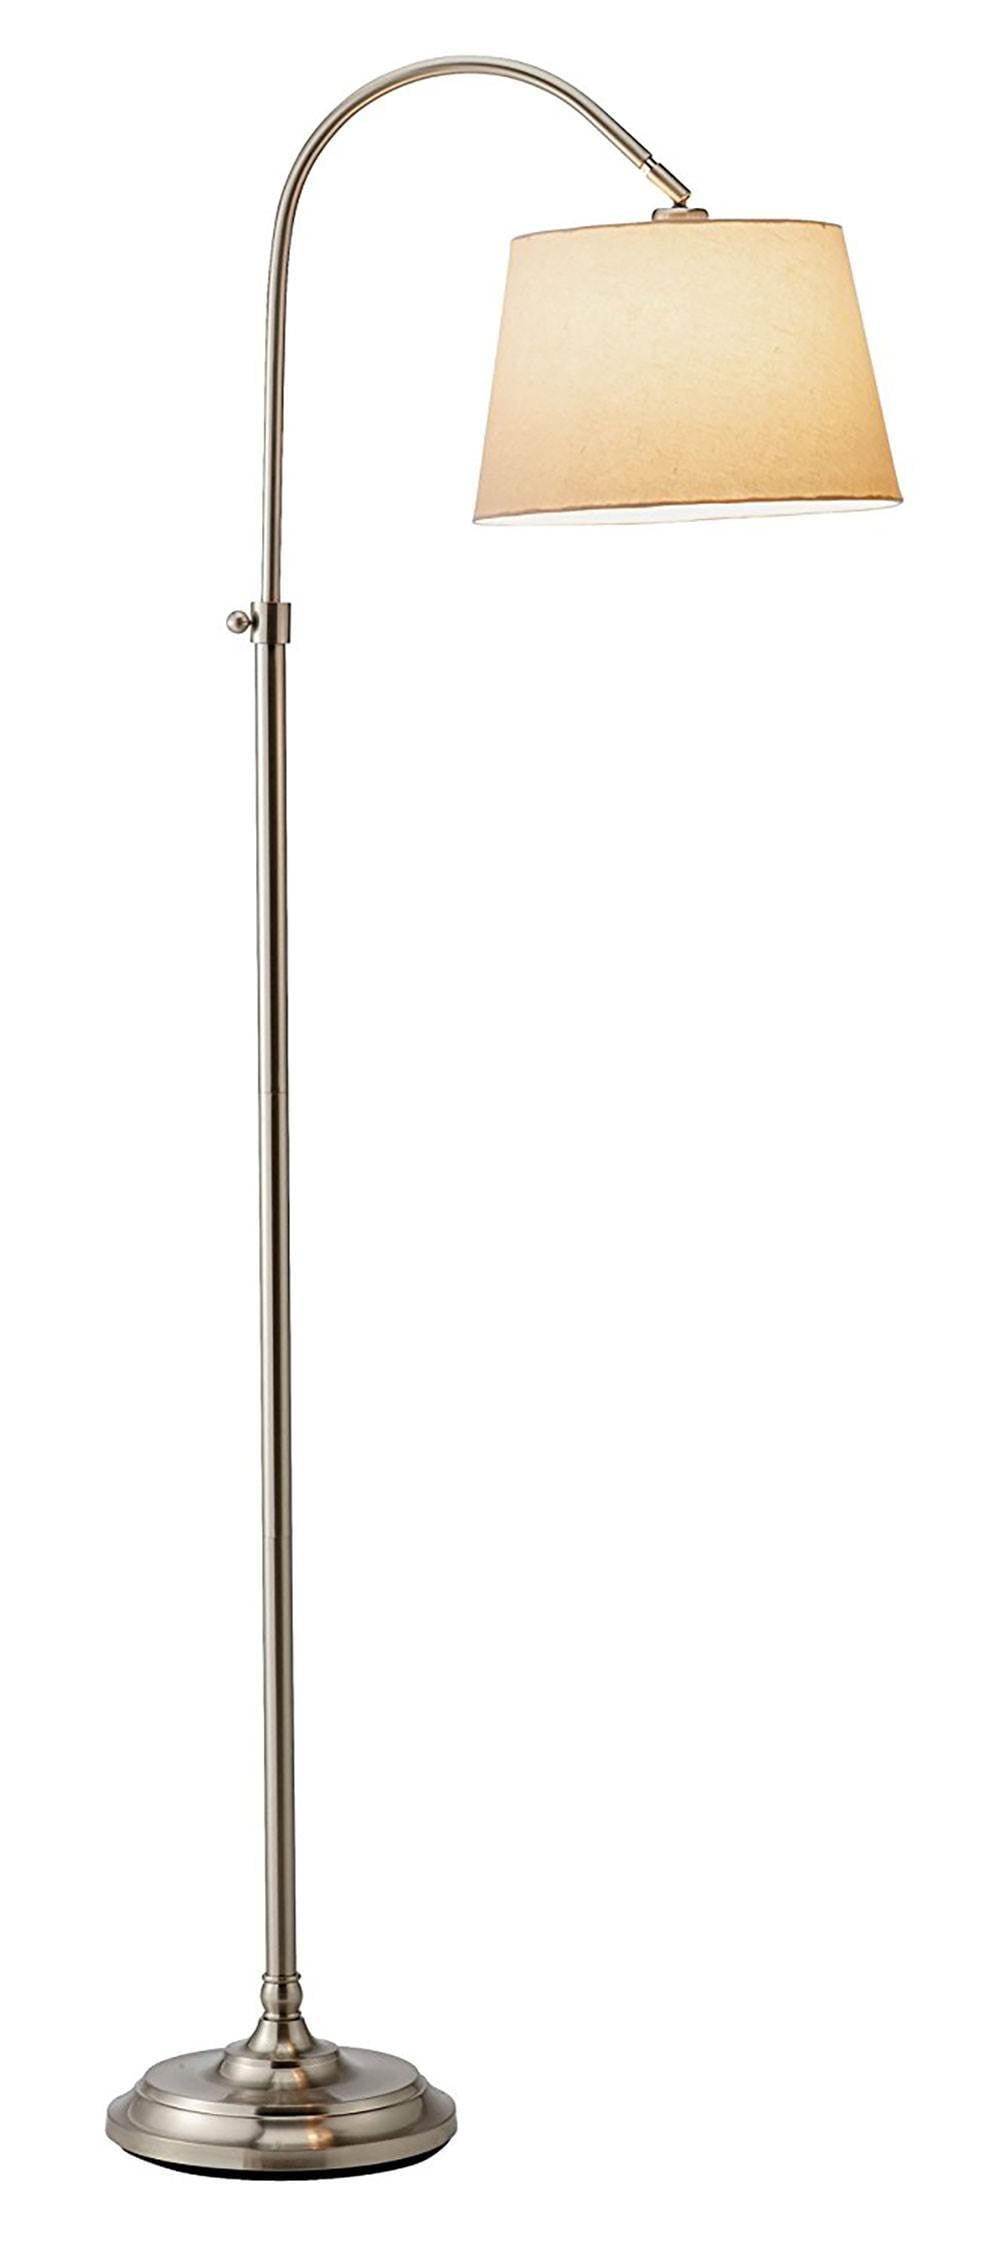 Bonnet Brushed Steel Arc Floor Lamp with Adjustable White Linen Shade